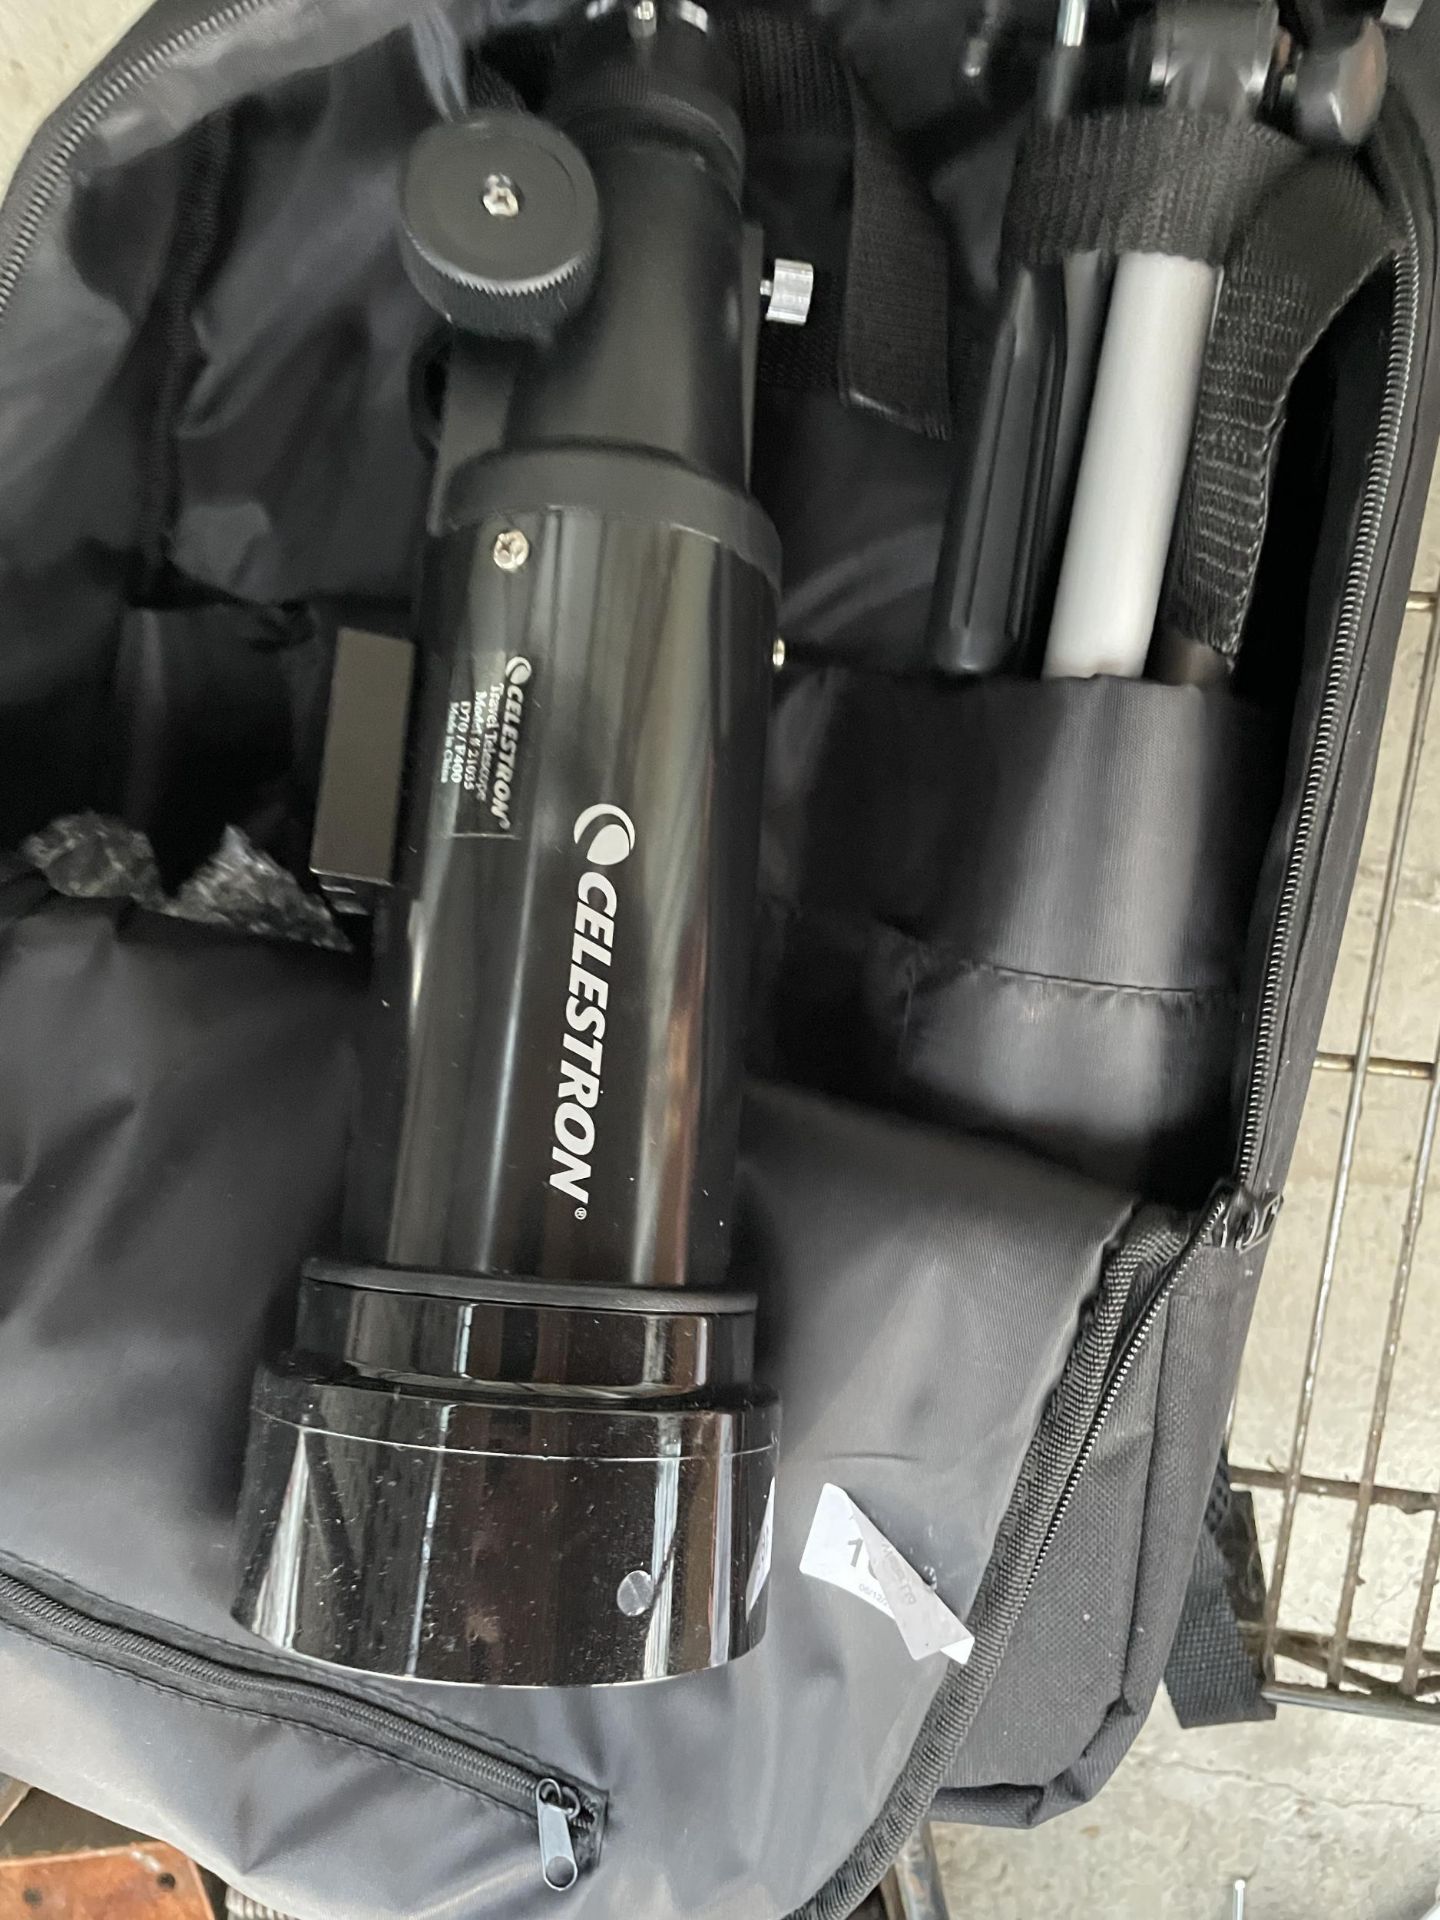 A CELESTRON TRAVEL TELESCOPE WITH CARRY BAG AND MANUAL - Image 3 of 4